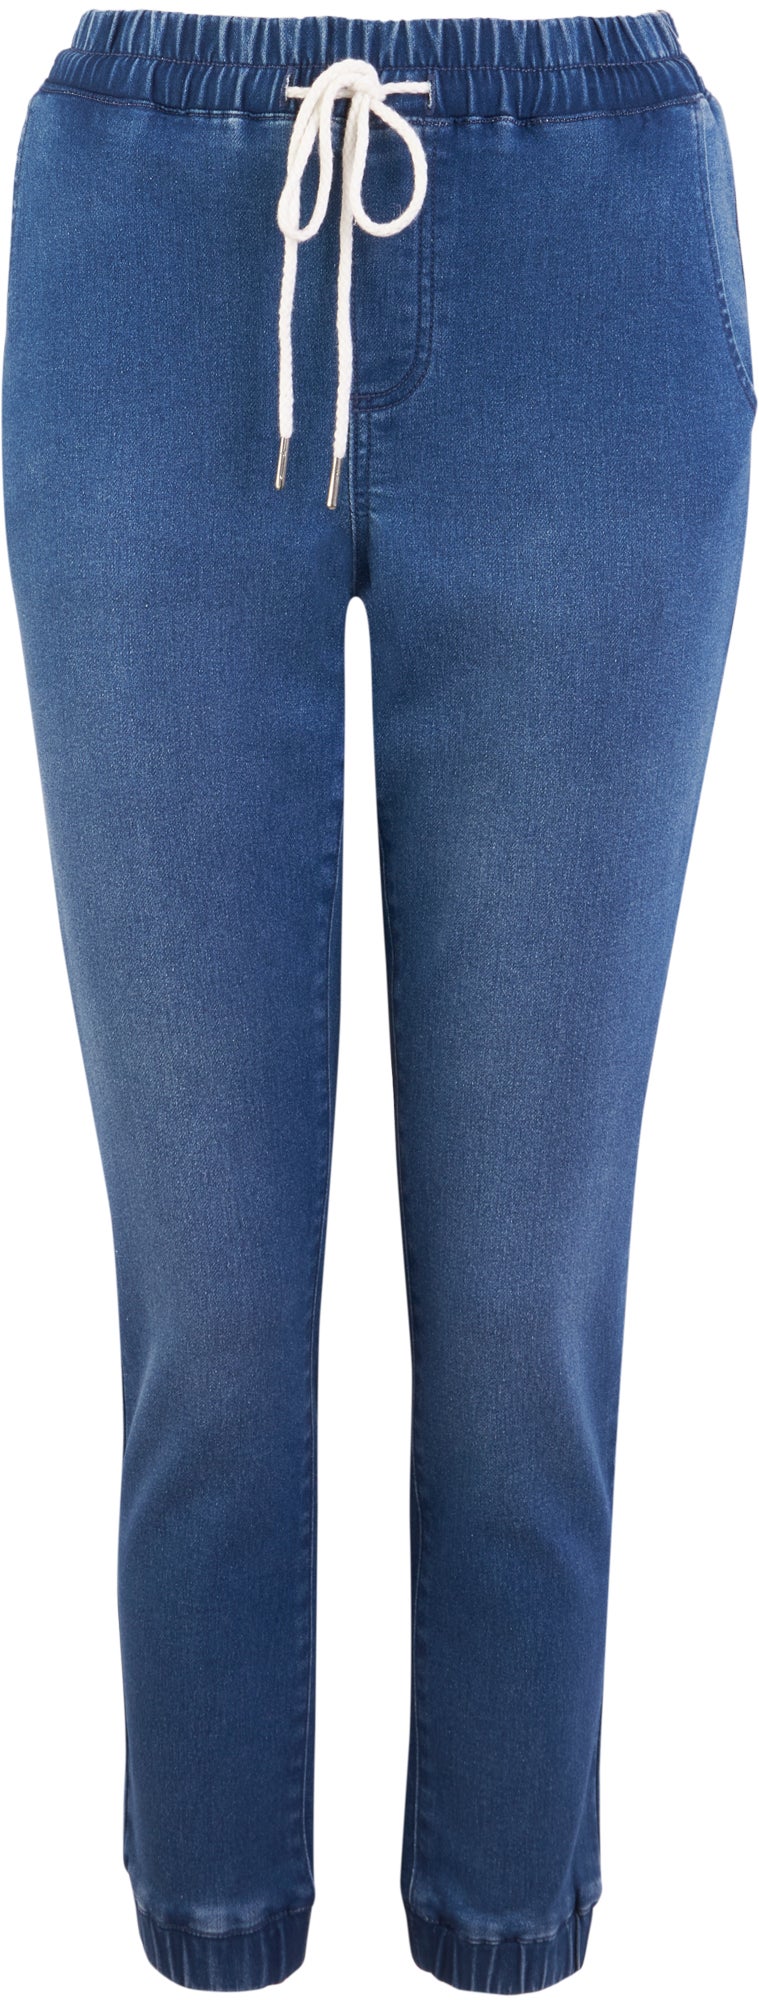 Party Wear Non Stretchable Ladies Blue Denim Jogger, Machine wash, Waist  Size: 30.0 at Rs 245/piece in Ulhasnagar